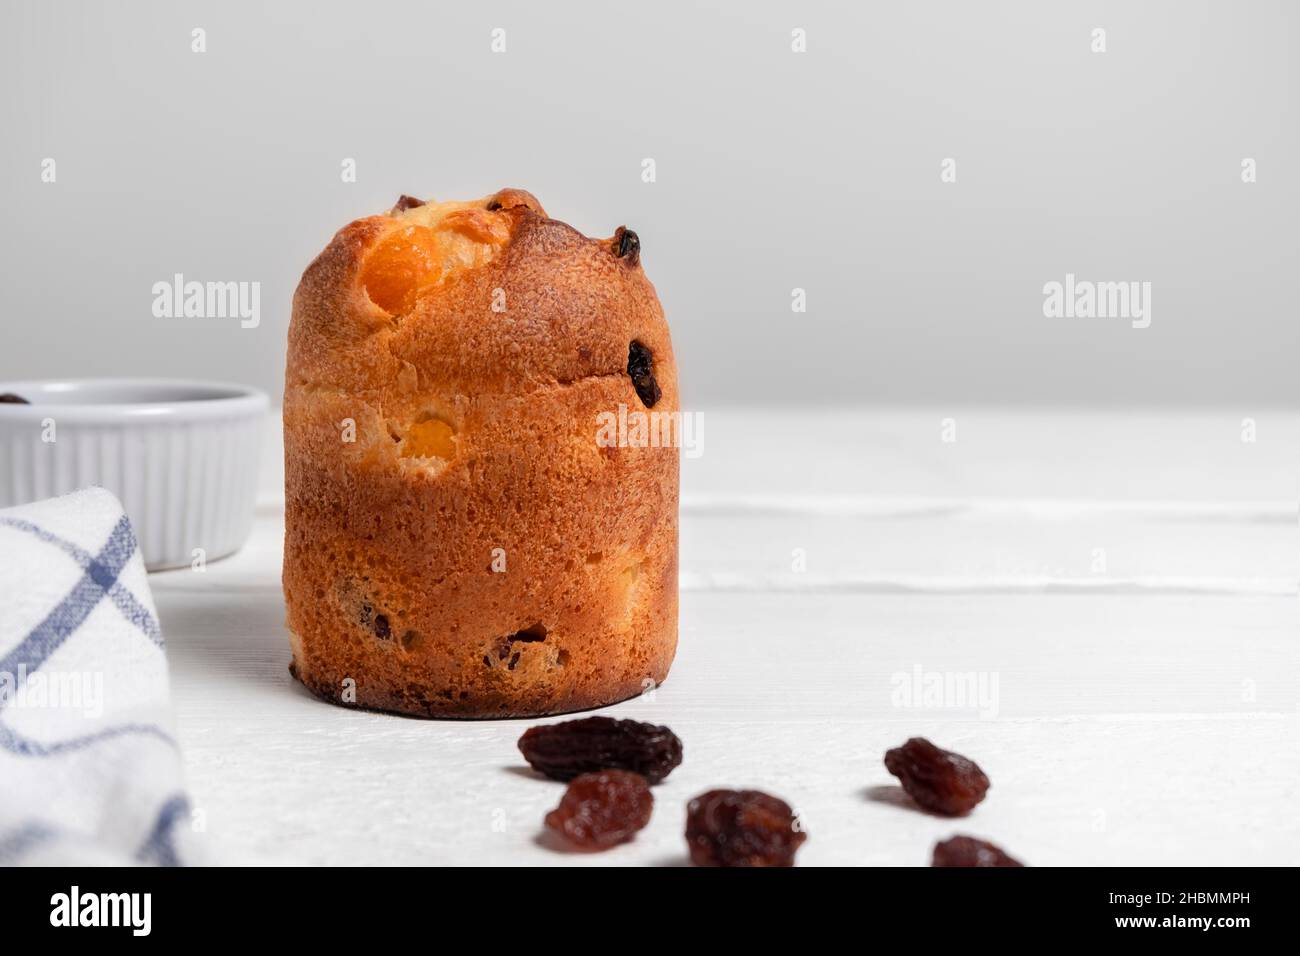 Festive Christmas dessert Panettone with raisins on white wooden background with copy space Stock Photo